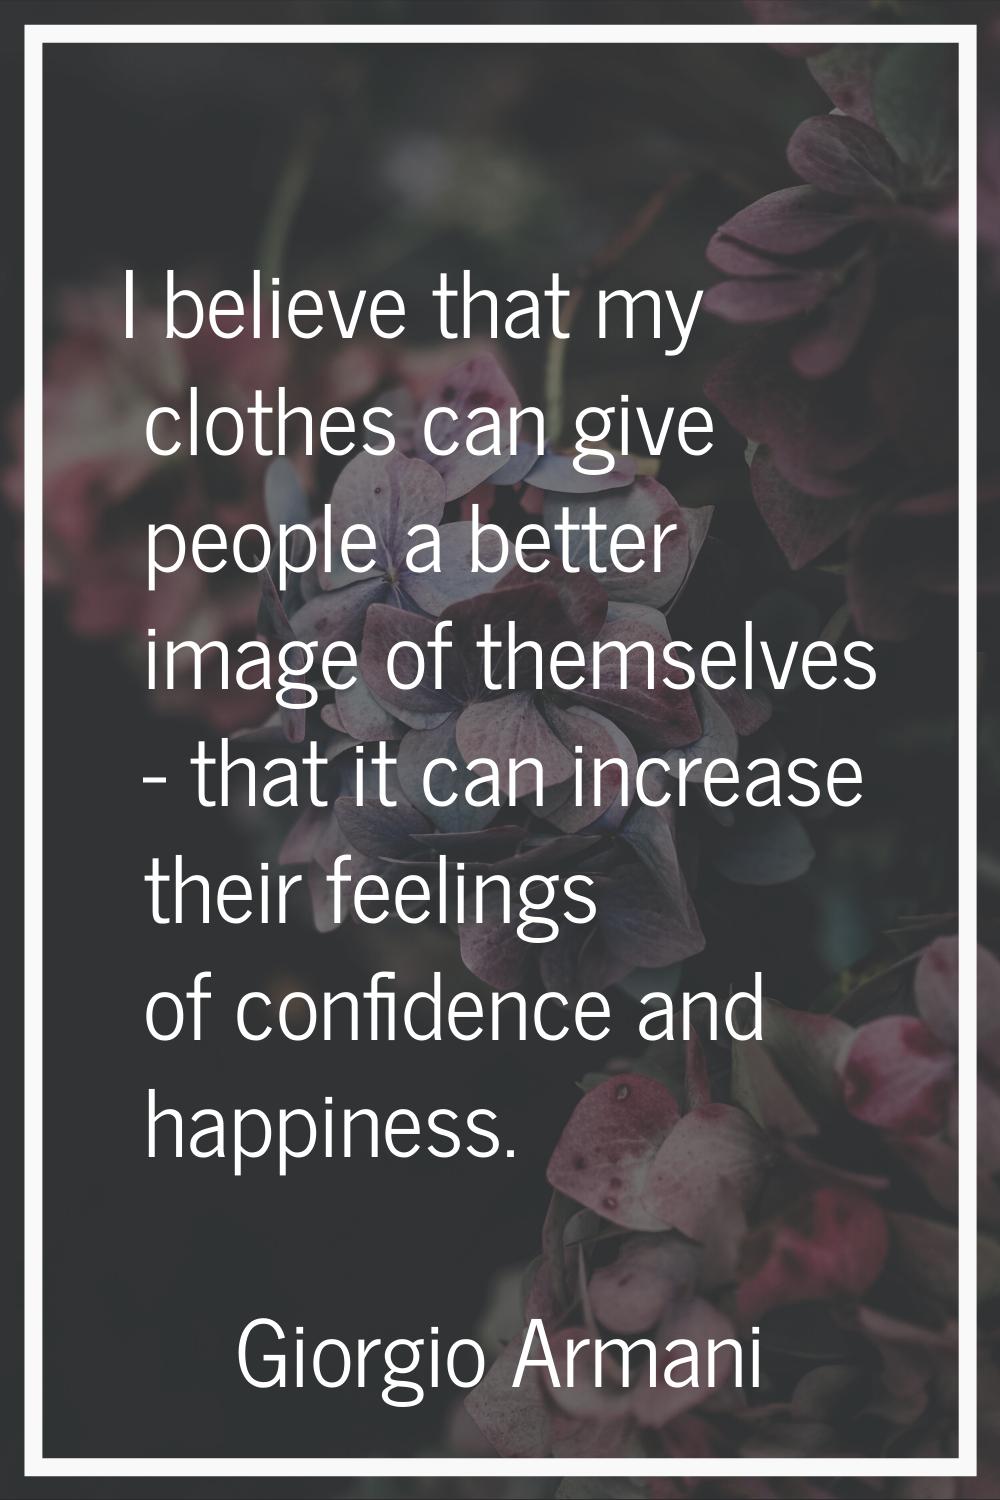 I believe that my clothes can give people a better image of themselves - that it can increase their